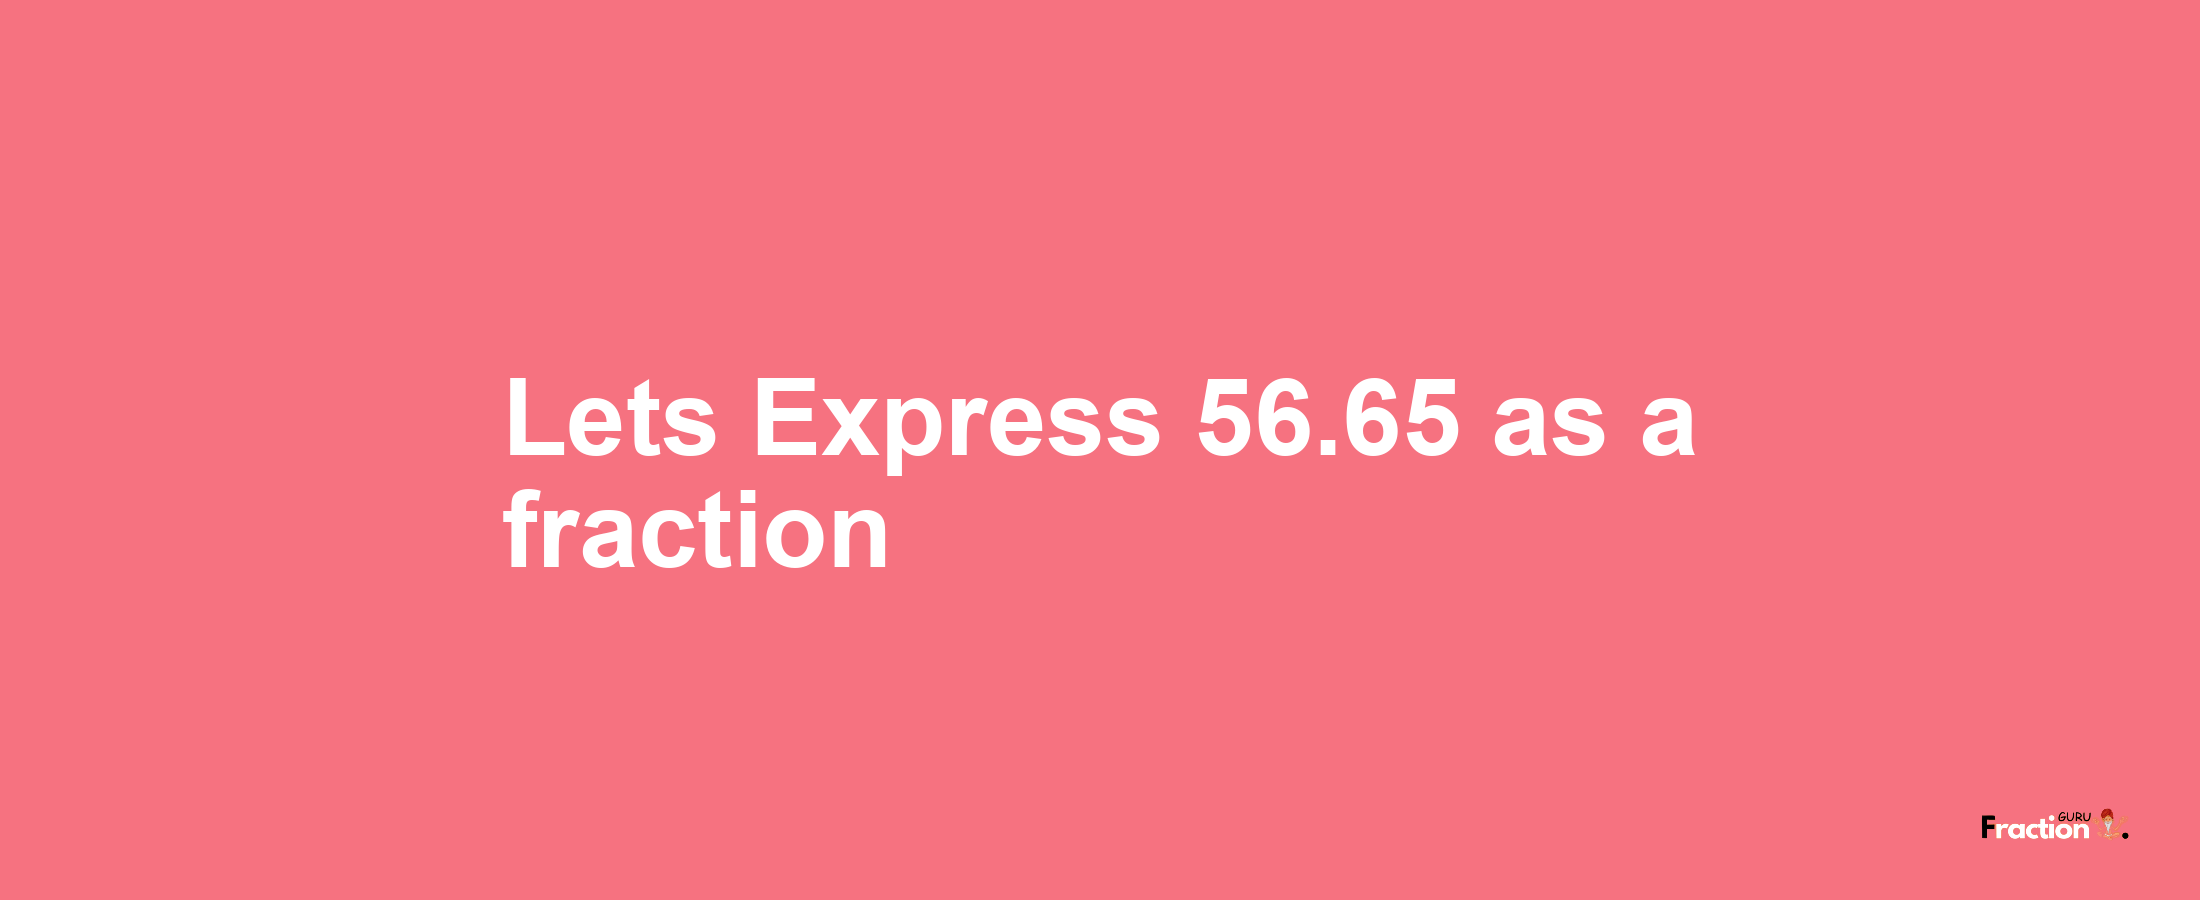 Lets Express 56.65 as afraction